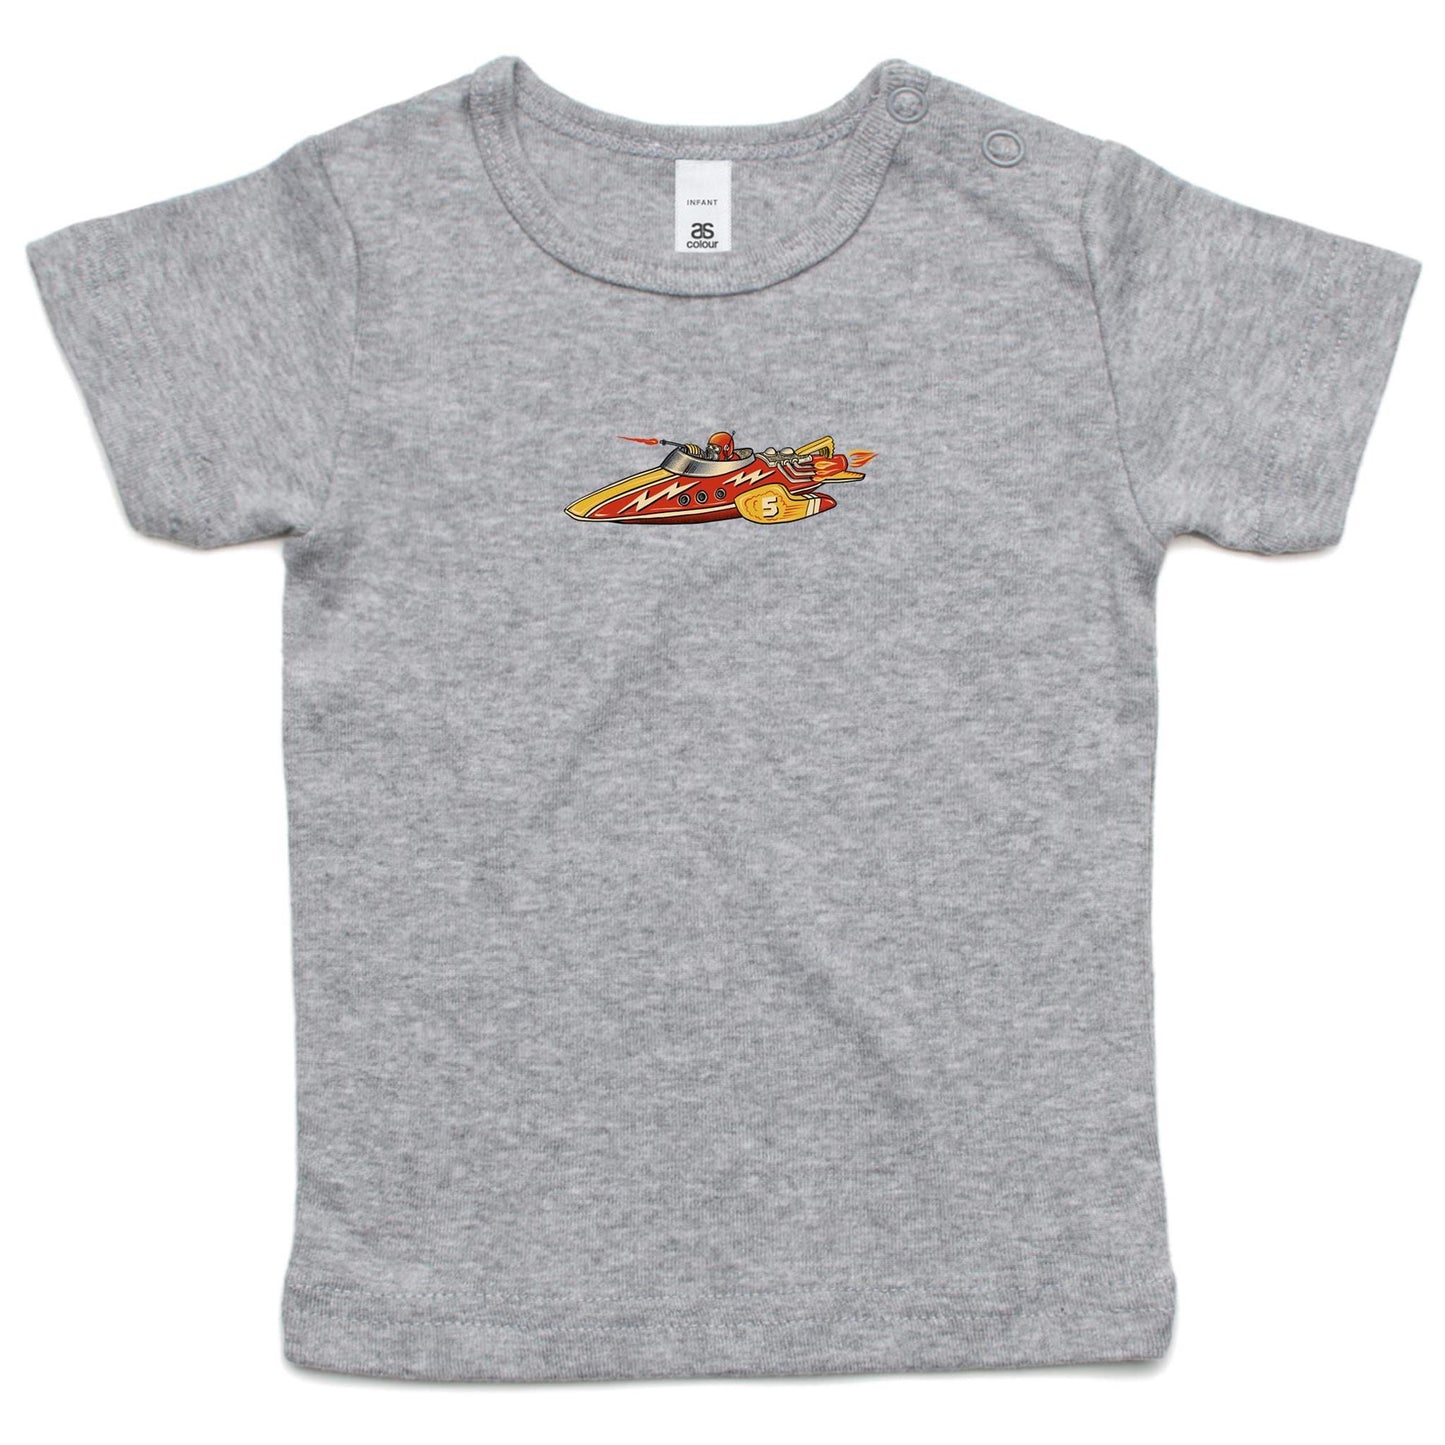 Toy Rocket Ship T Shirts for Babies